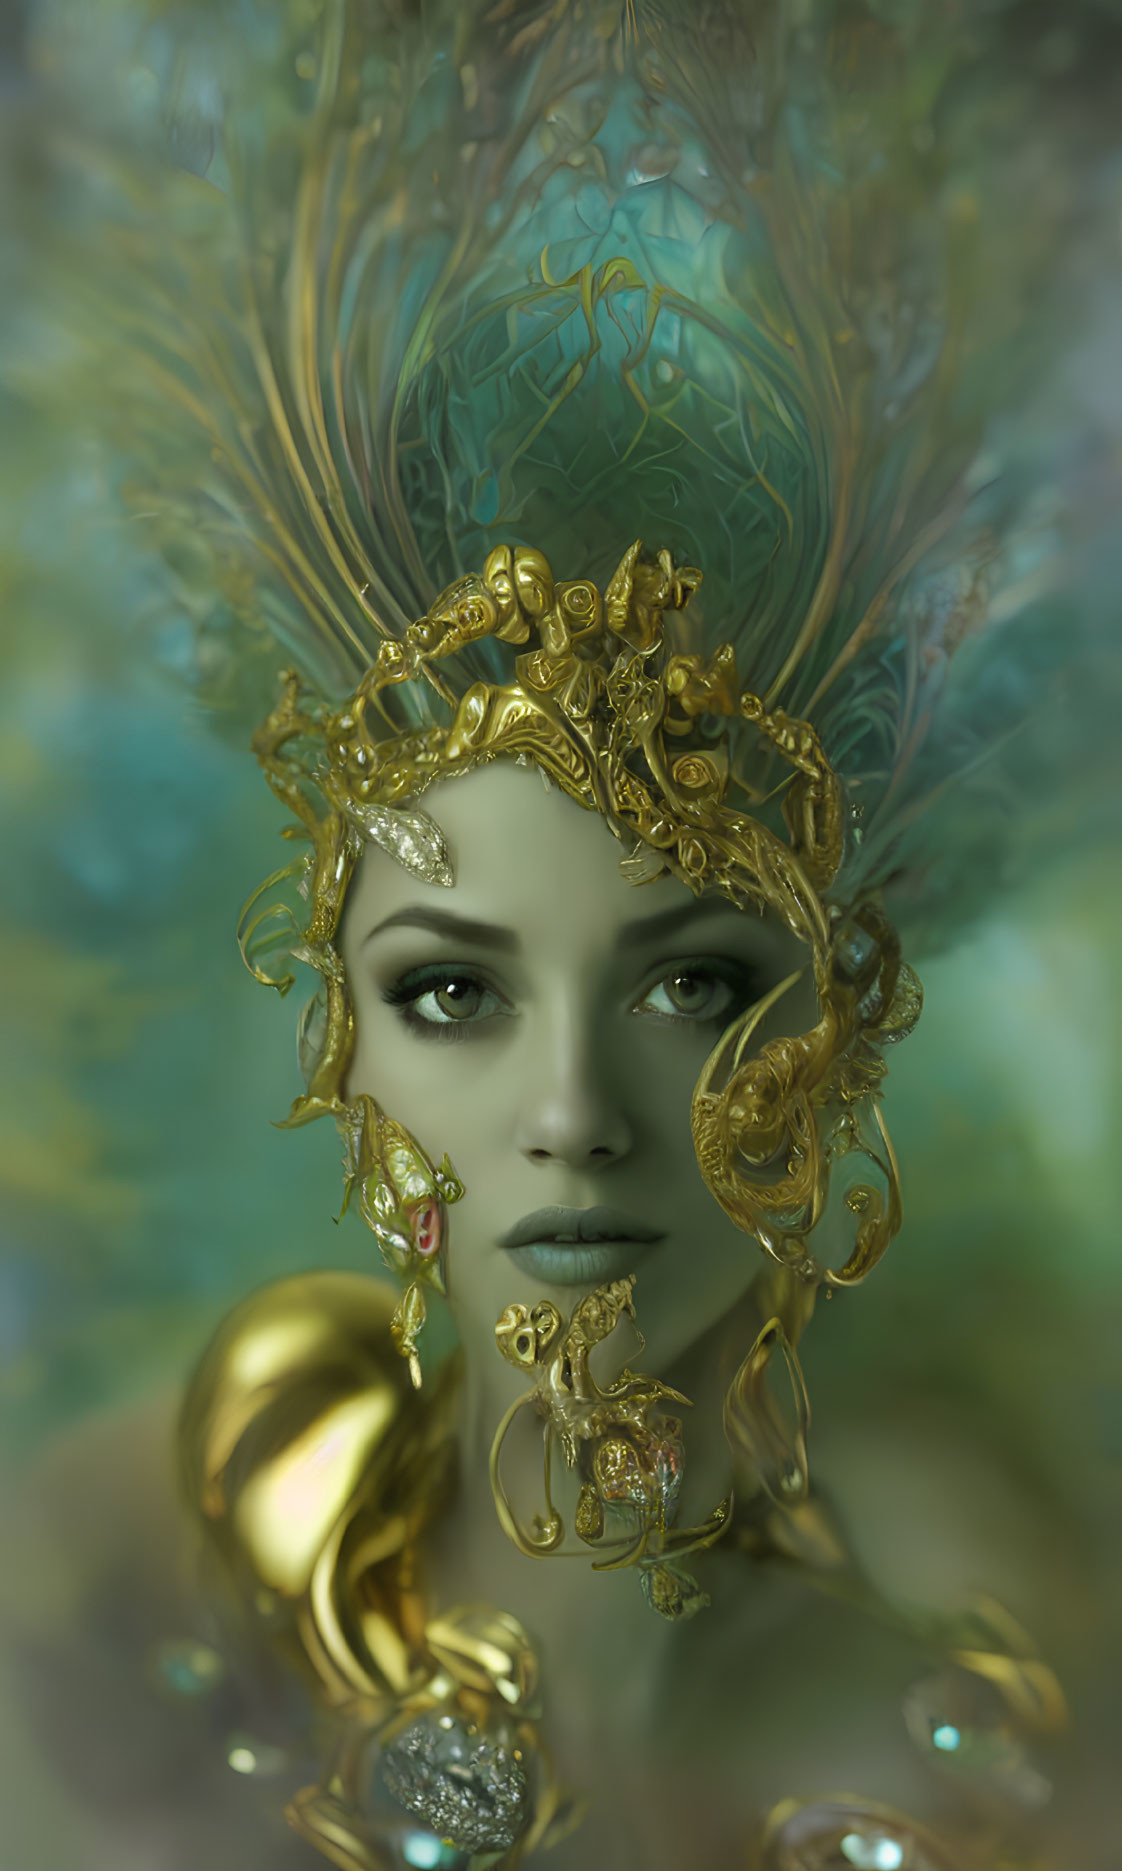 Elaborate golden headdress portrait with peacock feather details